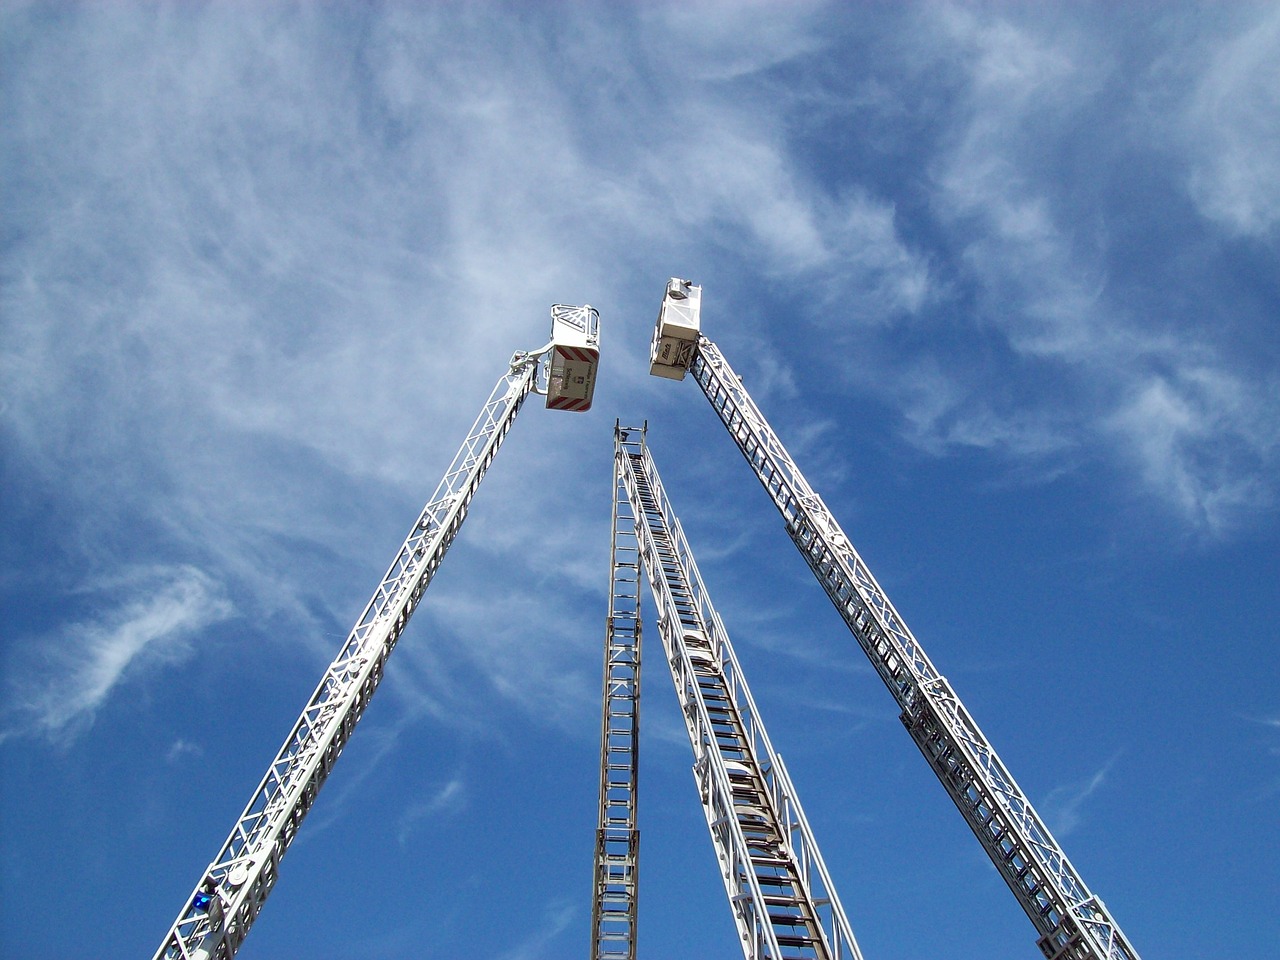 fire turntable ladders ladders free photo